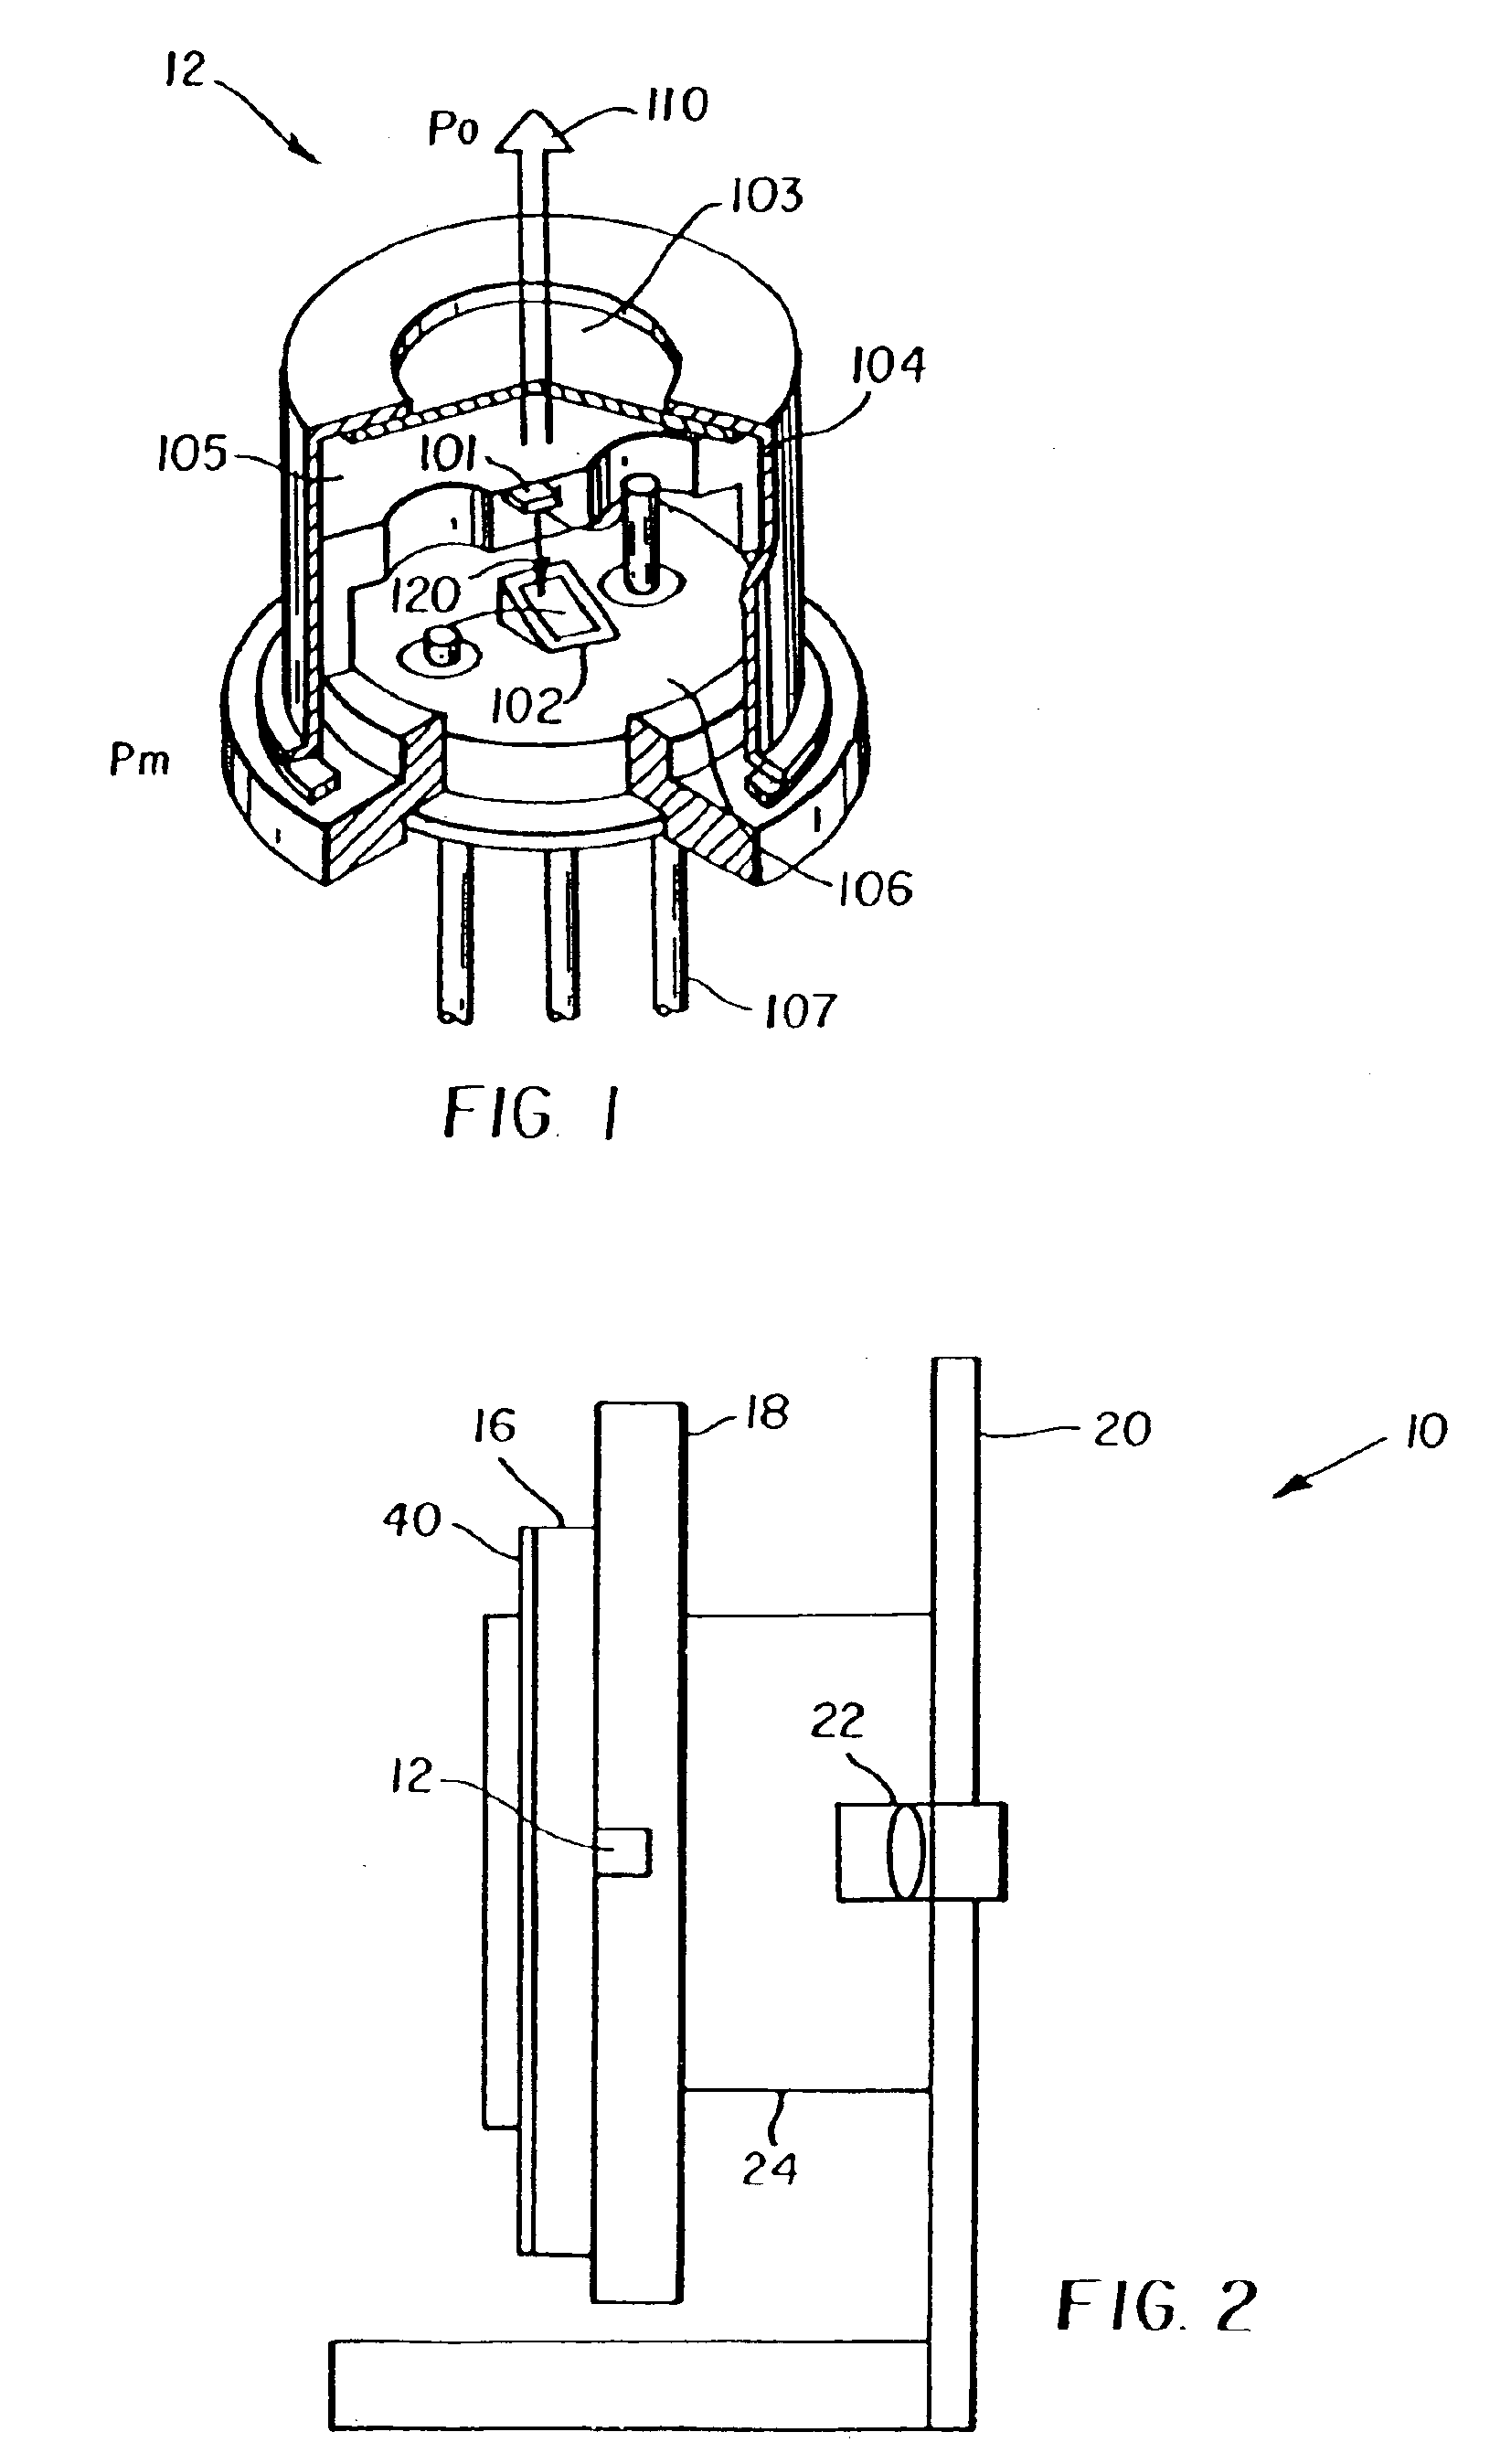 System and method for improving laser power and stabilization using high duty cycle radio frequency injection